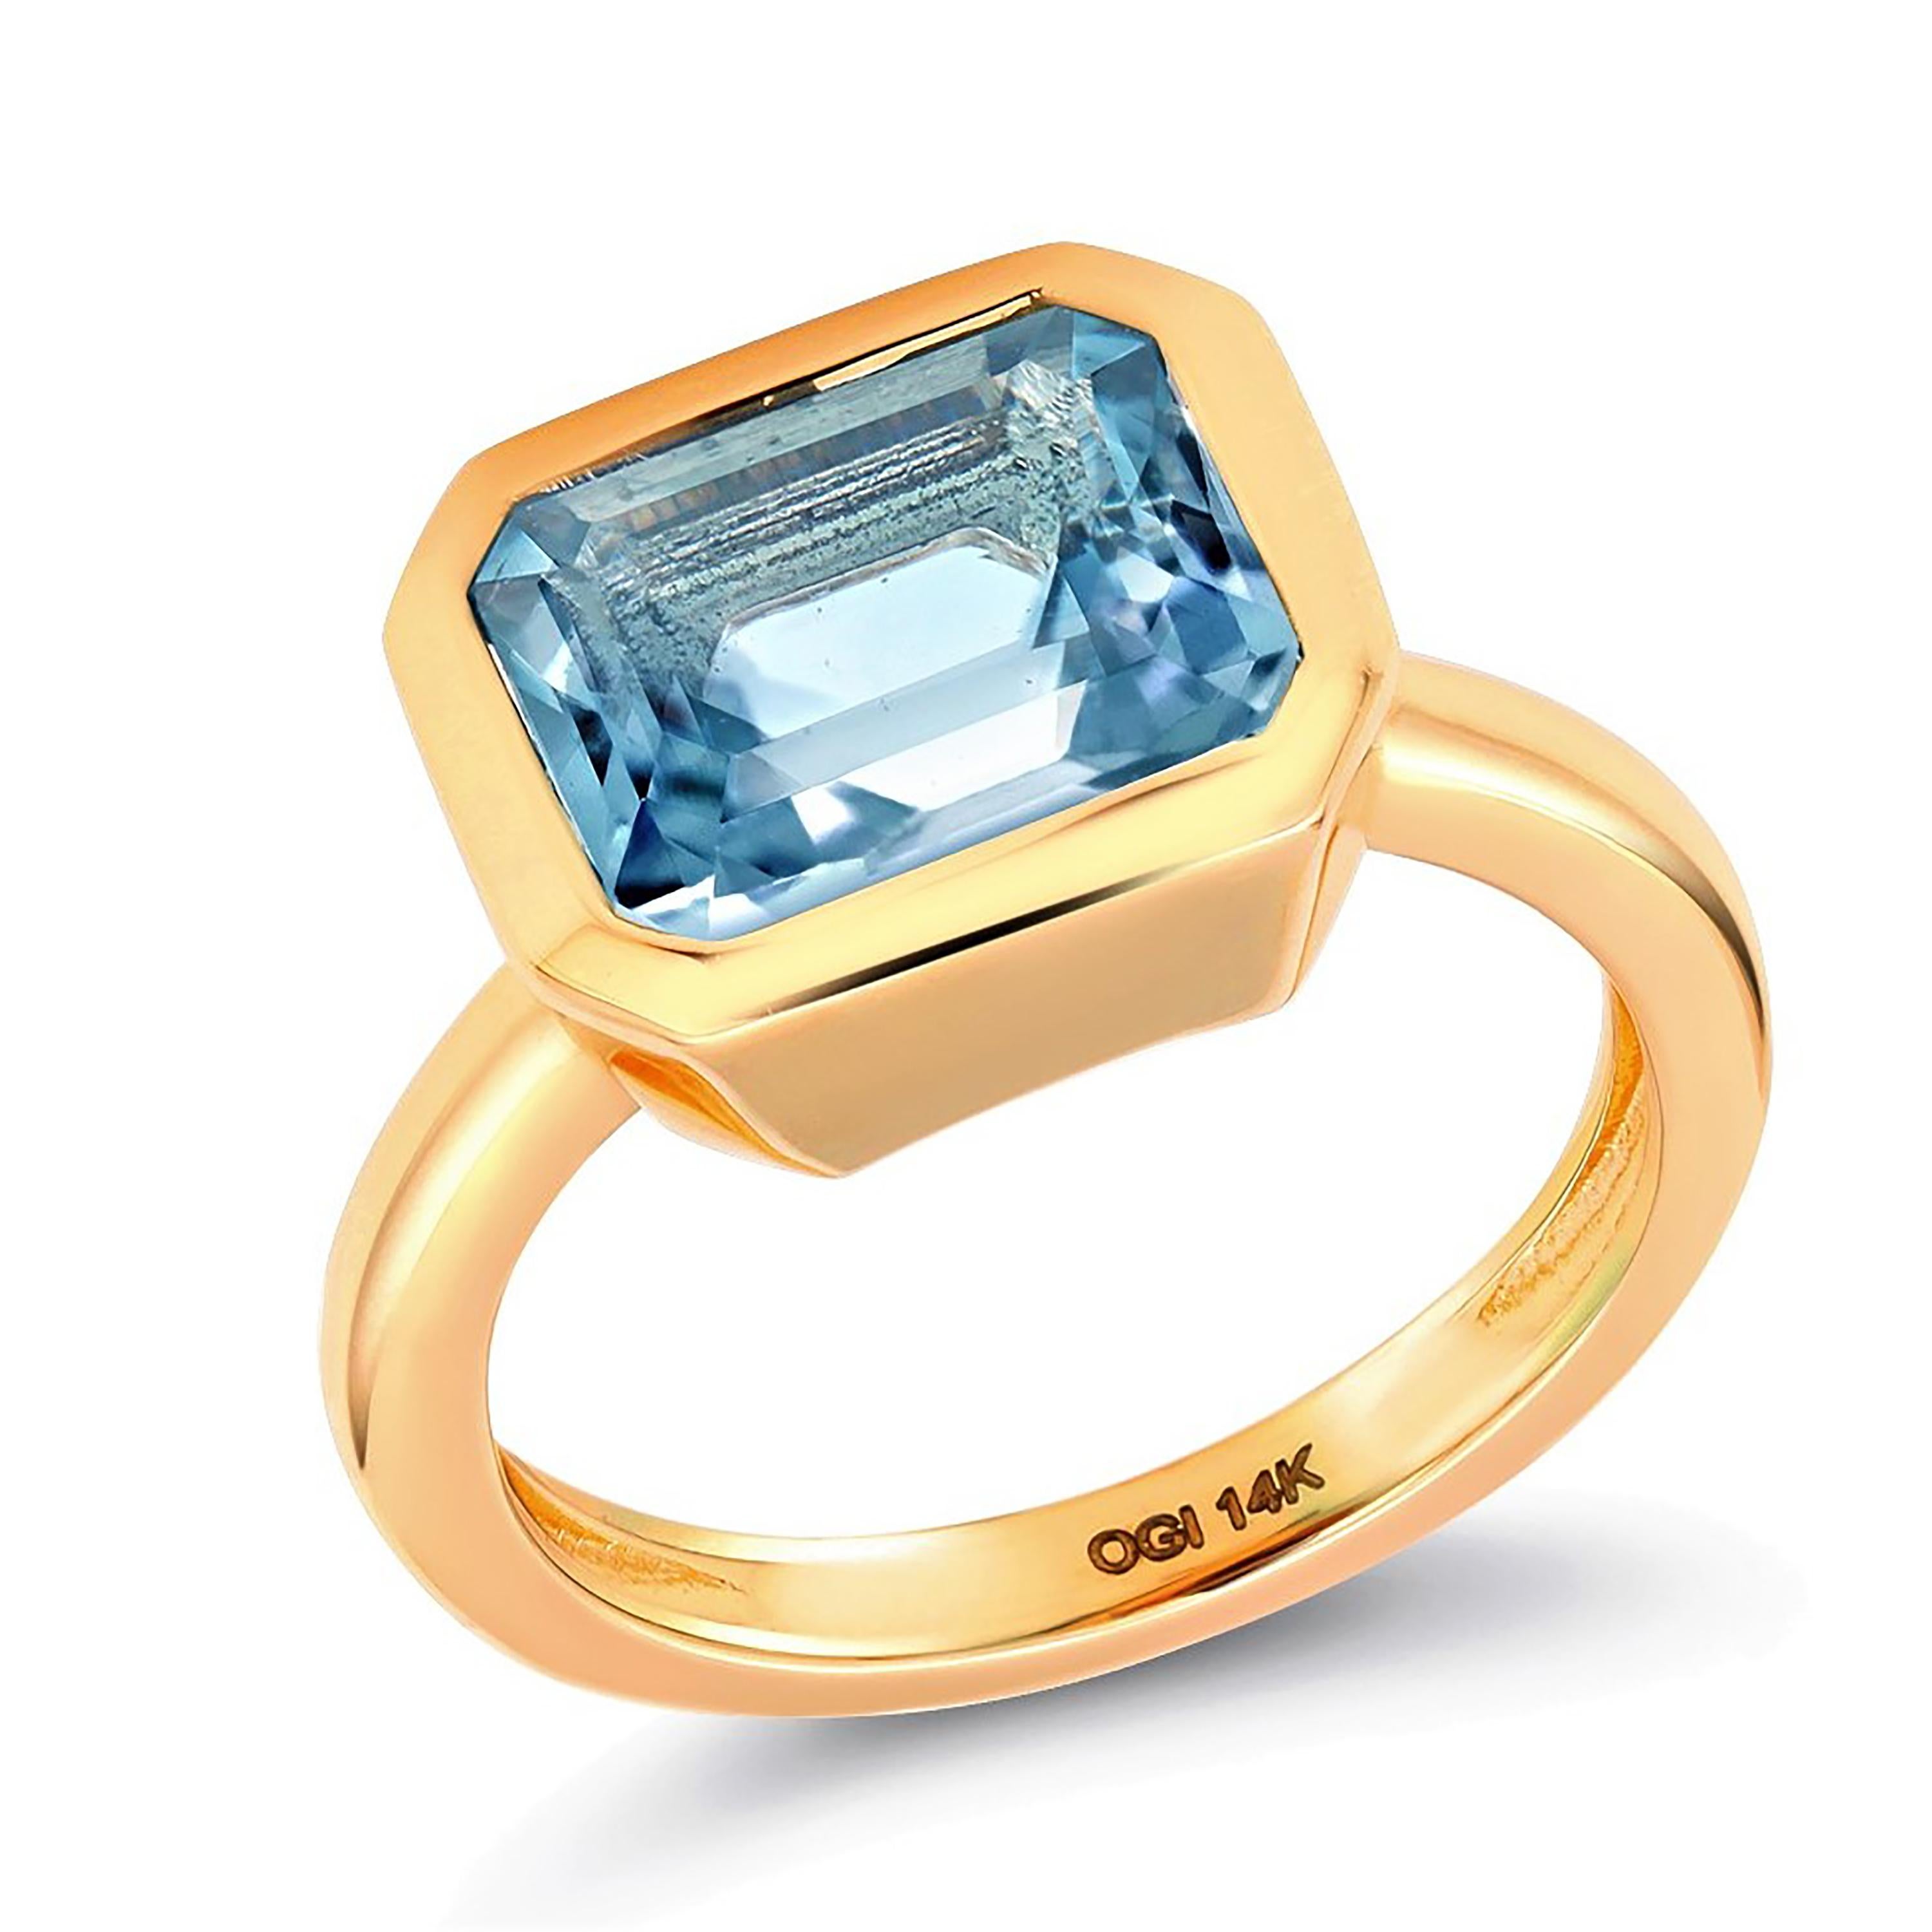 Fourteen karats yellow gold raised bezel dome cocktail ring
Blue and brilliant emerald cut shaped aquamarine weighing 3.14 carats   
Aquamarine hue color: sky blue                                                                 
Ring size 6.5 In